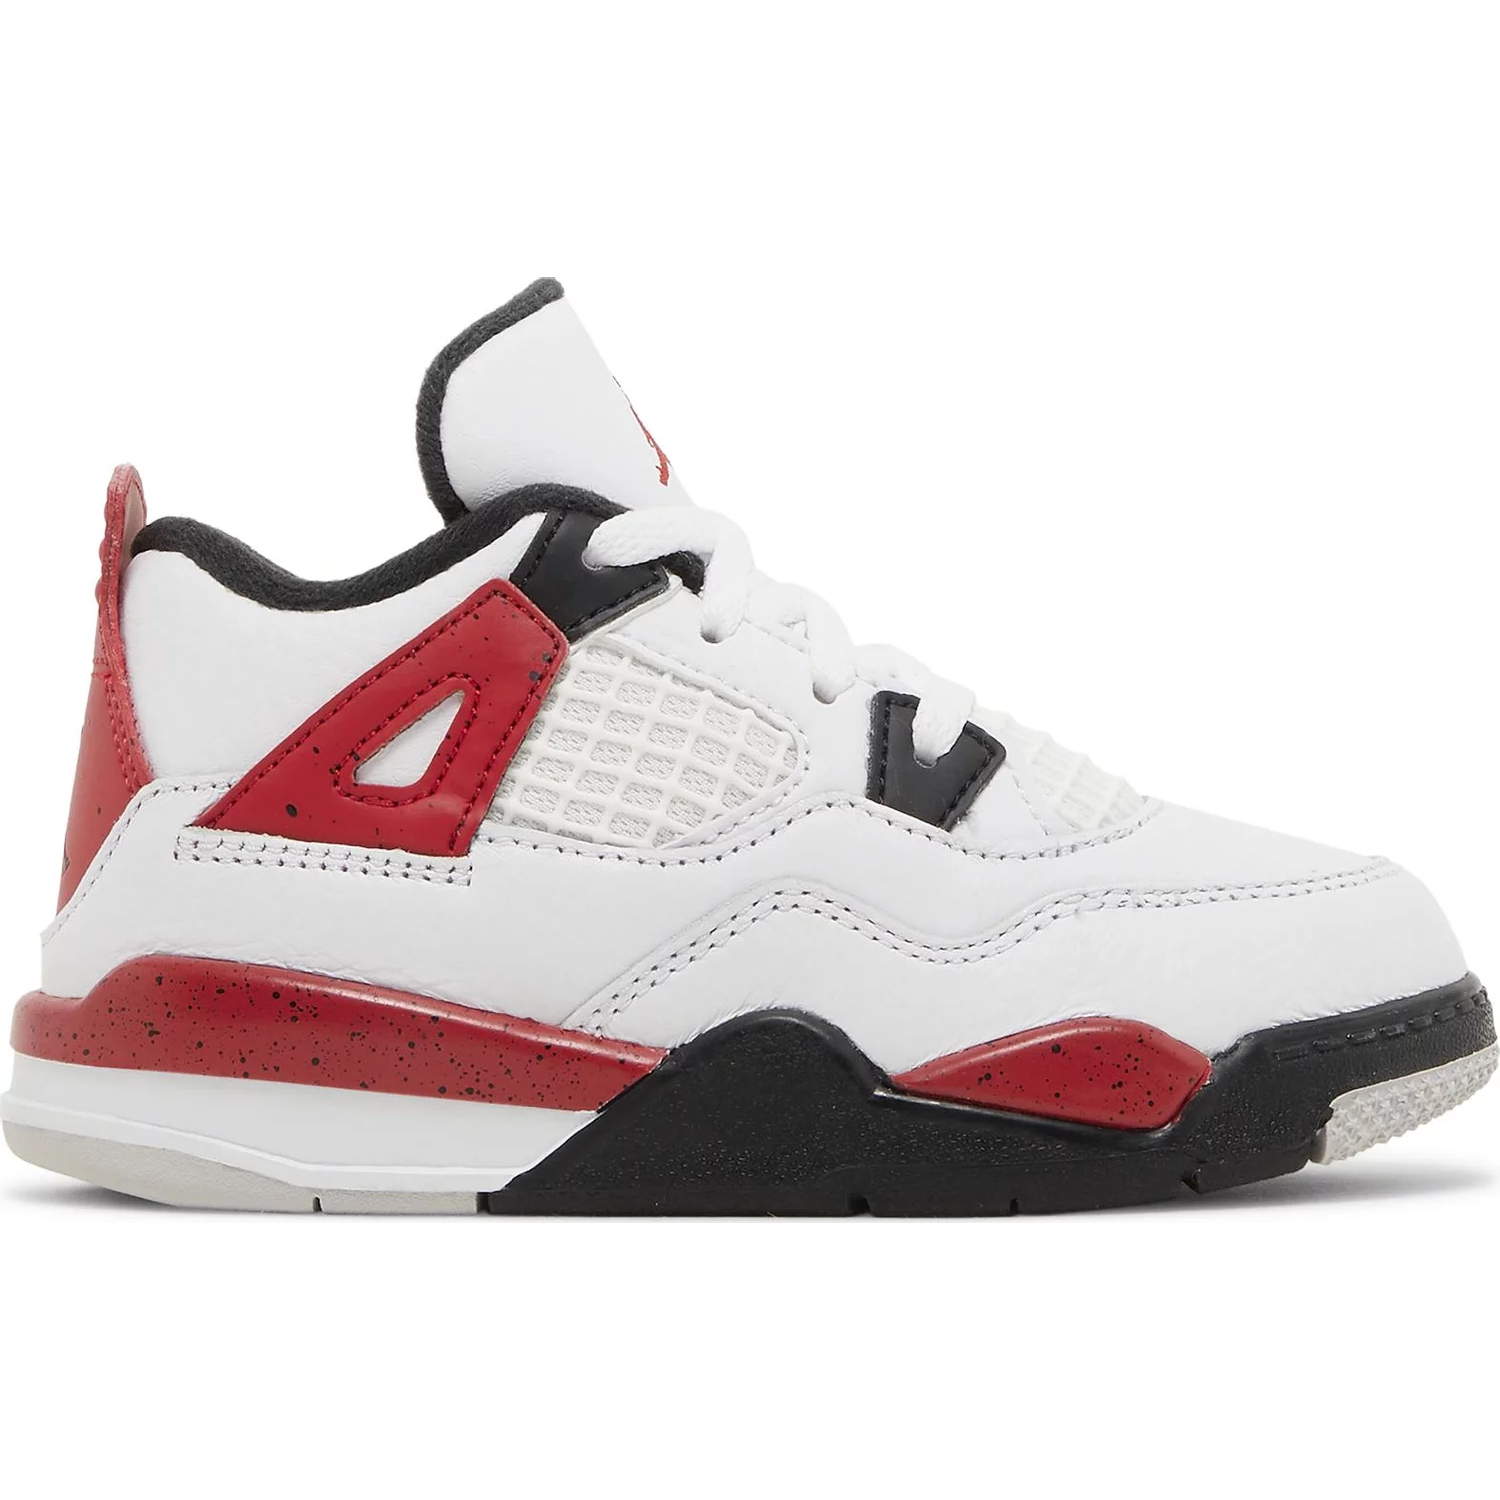 AJ4 (TD) "red cement"